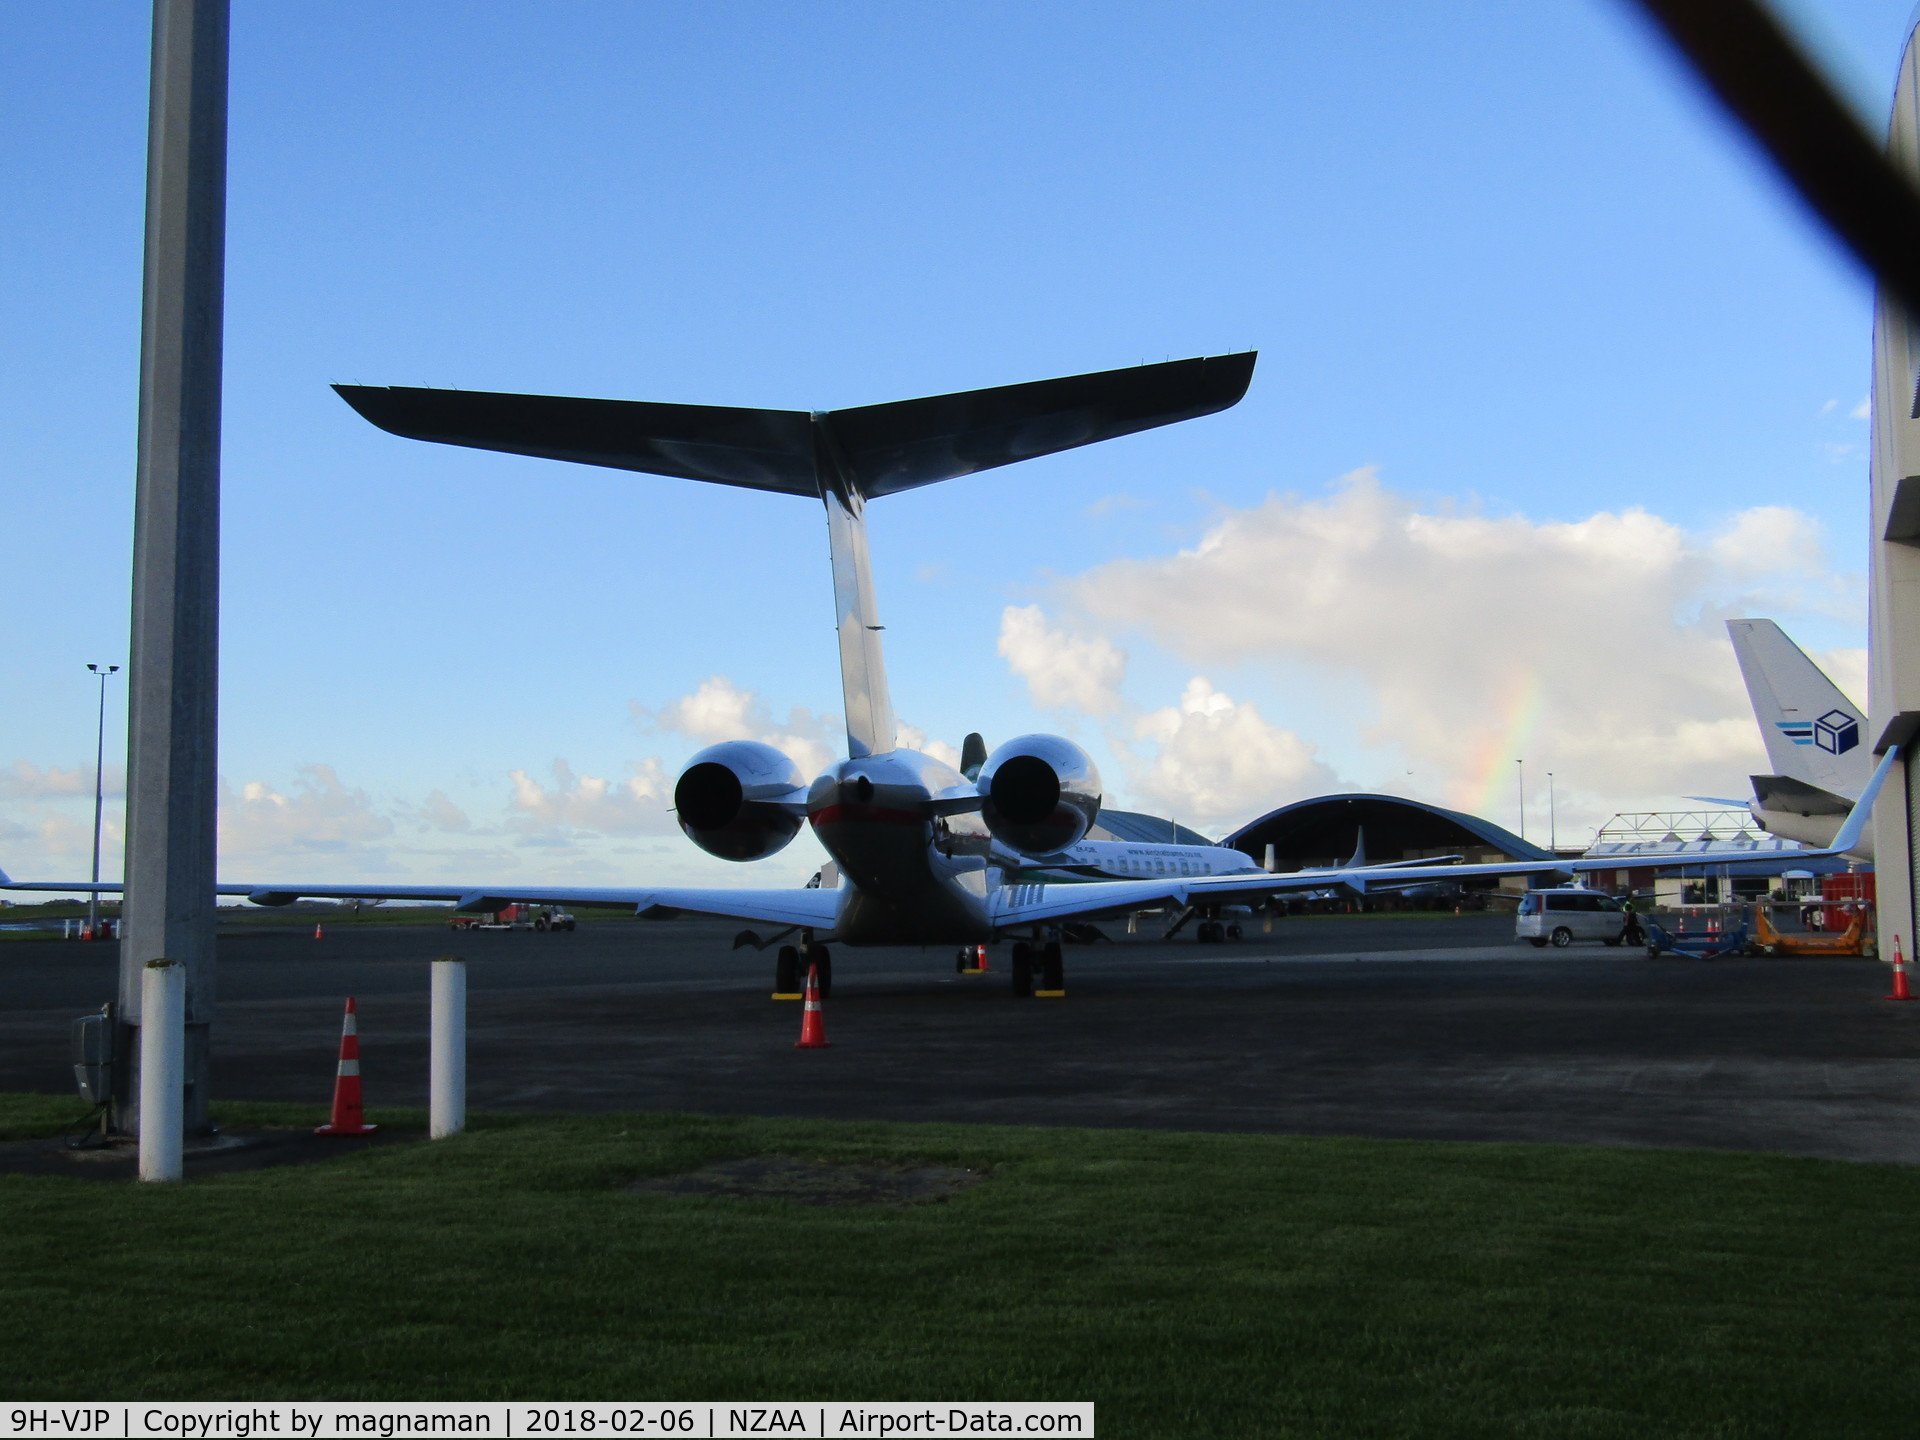 9H-VJP, 2014 Bombardier BD-700-1A10 Global 6000 C/N 9677, been a few vistajet in NZ this summer - this one new to me